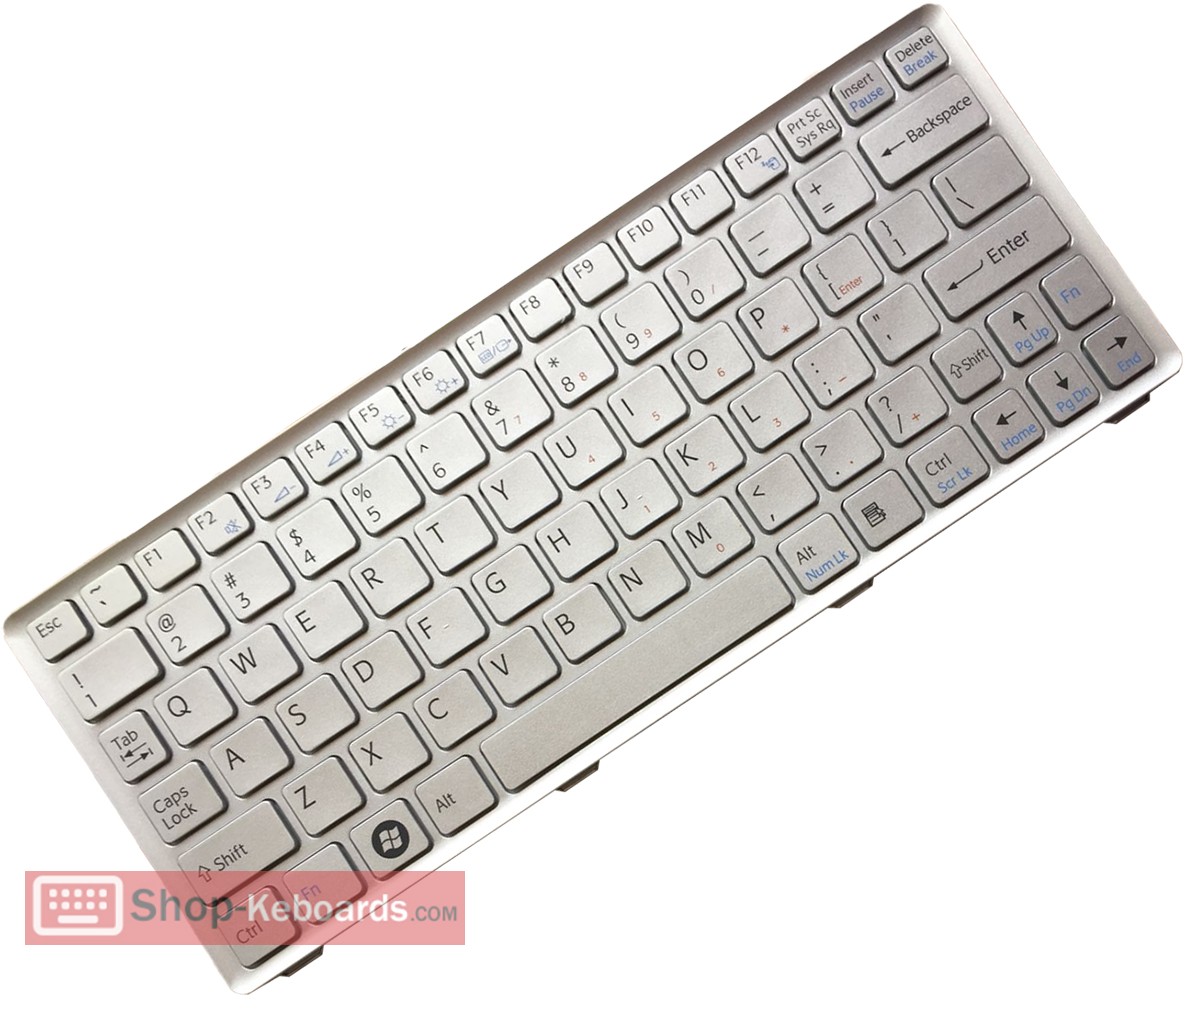 Sony Vaio VPC-W21 Keyboard replacement